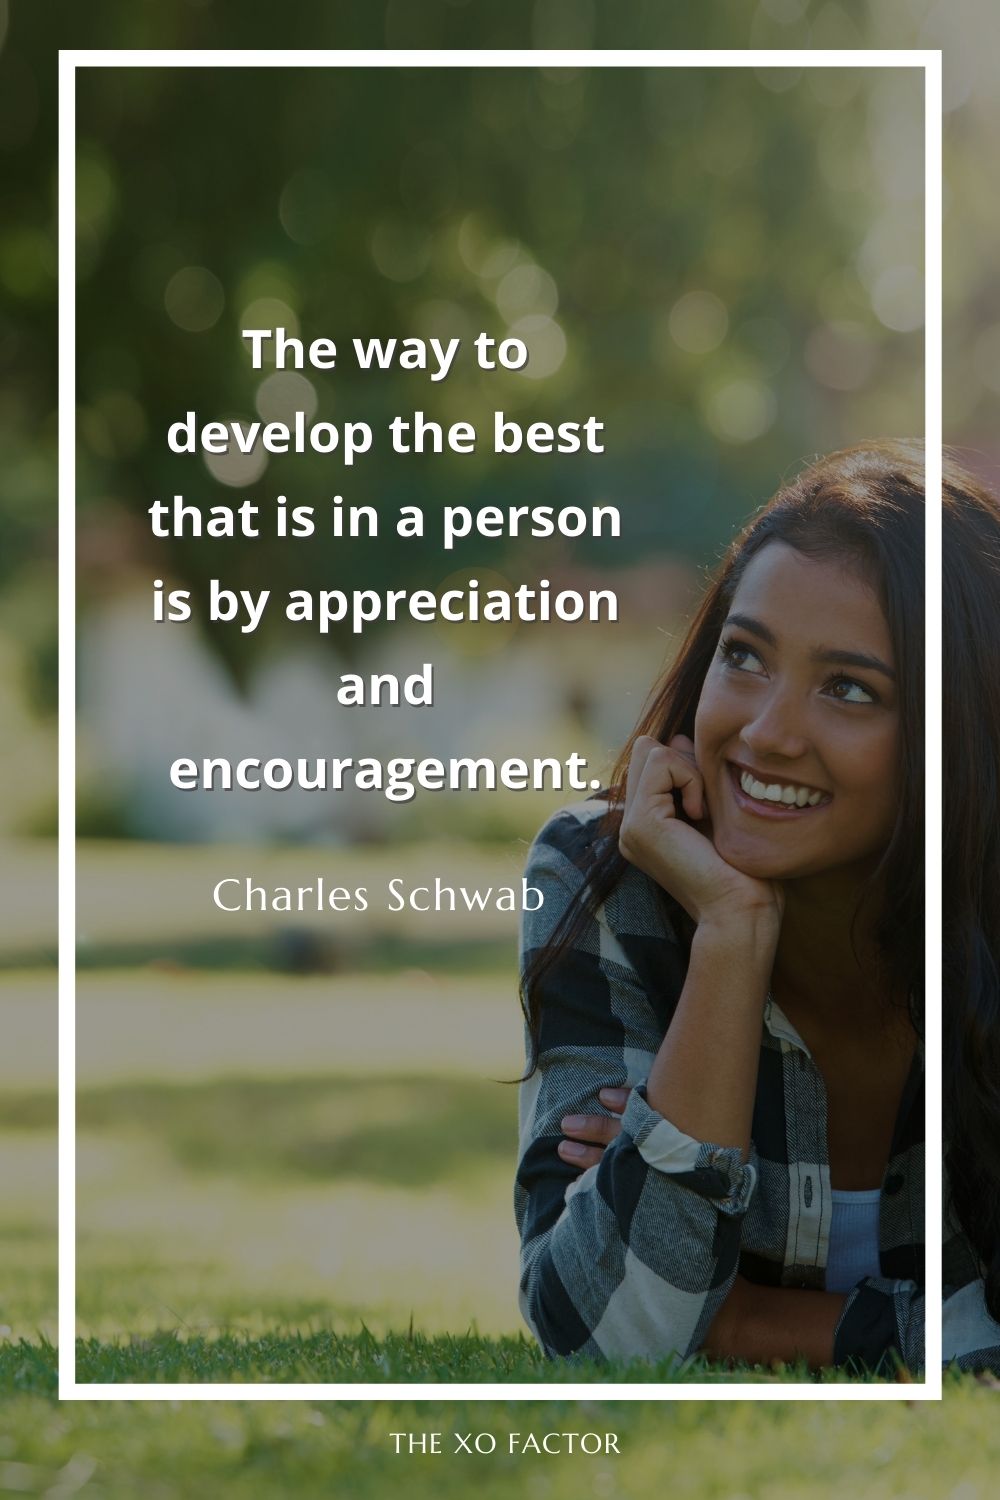 The way to develop the best that is in a person is by appreciation and encouragement.